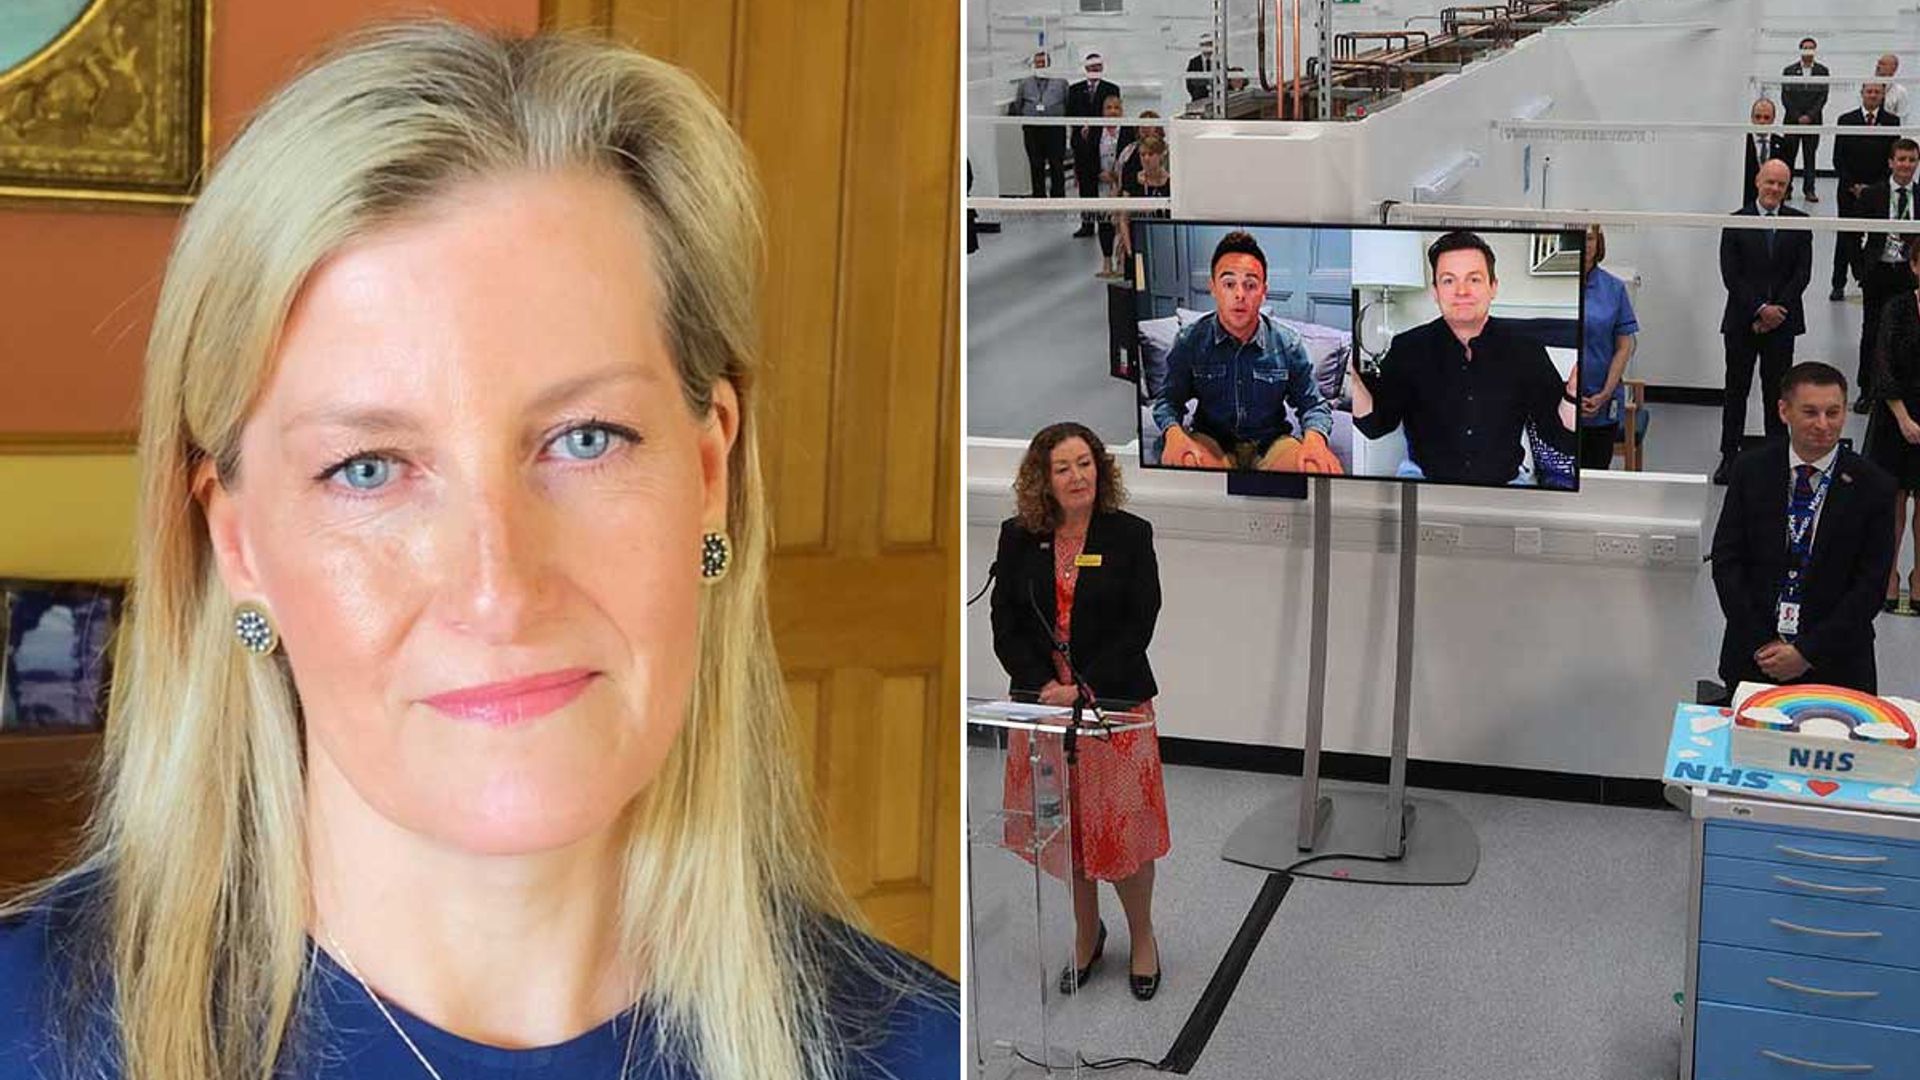 The Countess of Wessex teams up with Ant and Dec to open new NHS hospital 